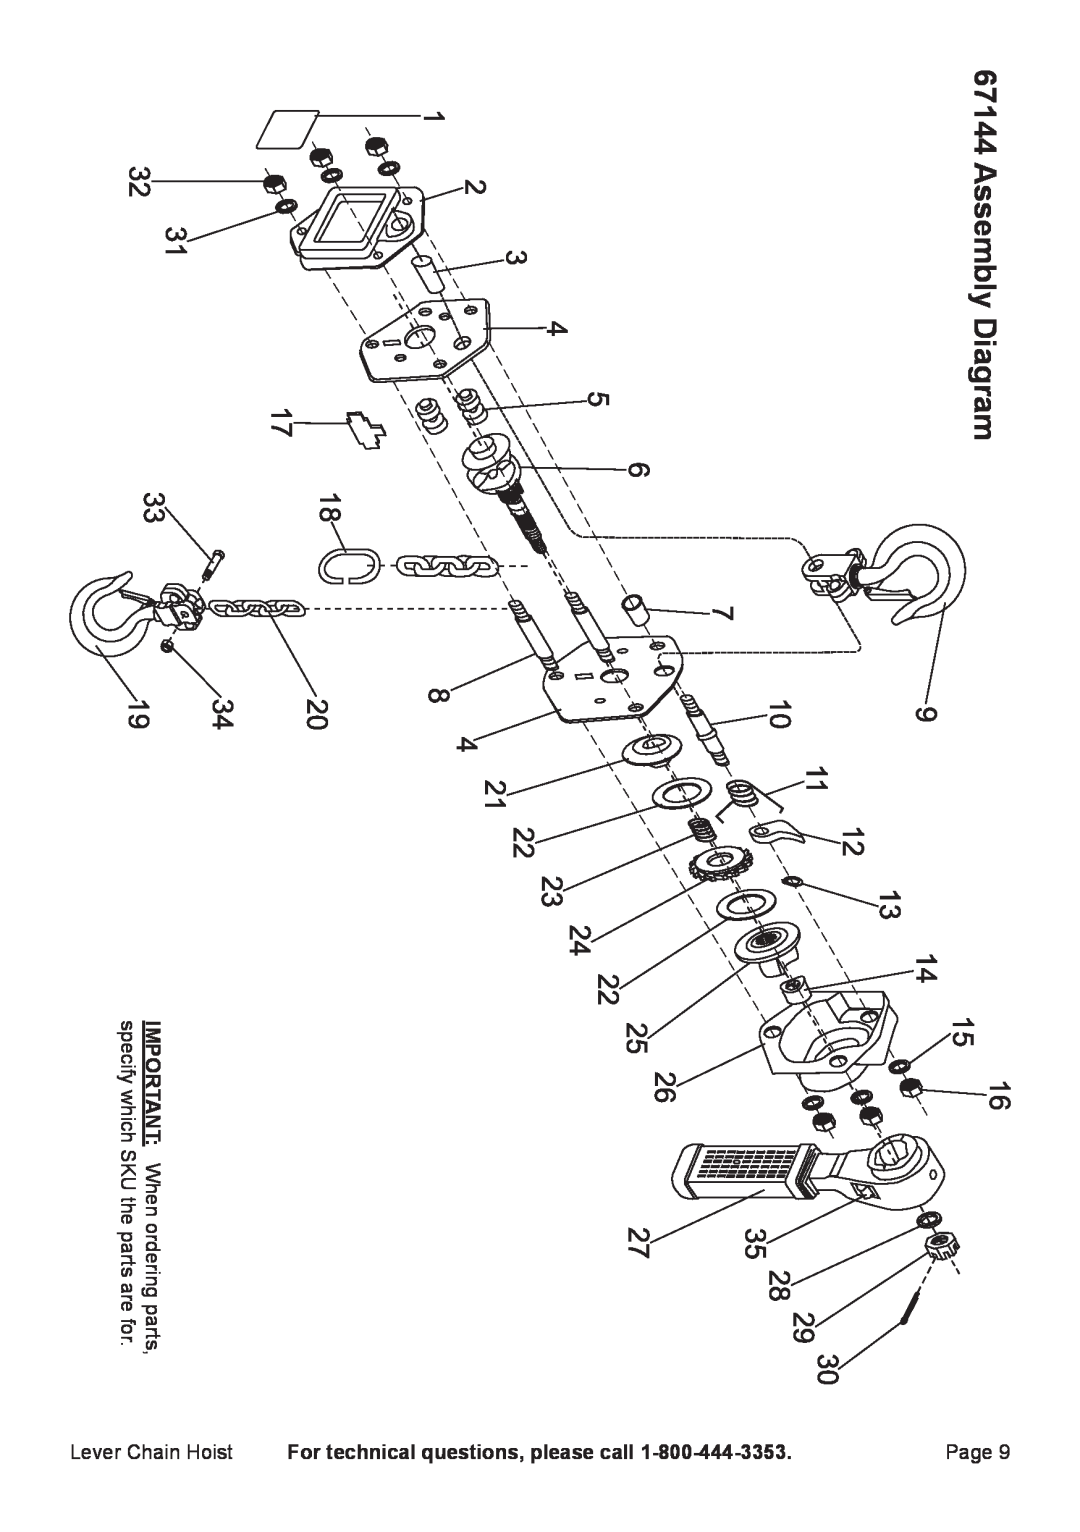 Harbor Freight Tools 67144, 66106, 69482 manual Assembly Diagram, For technical questions, please call 